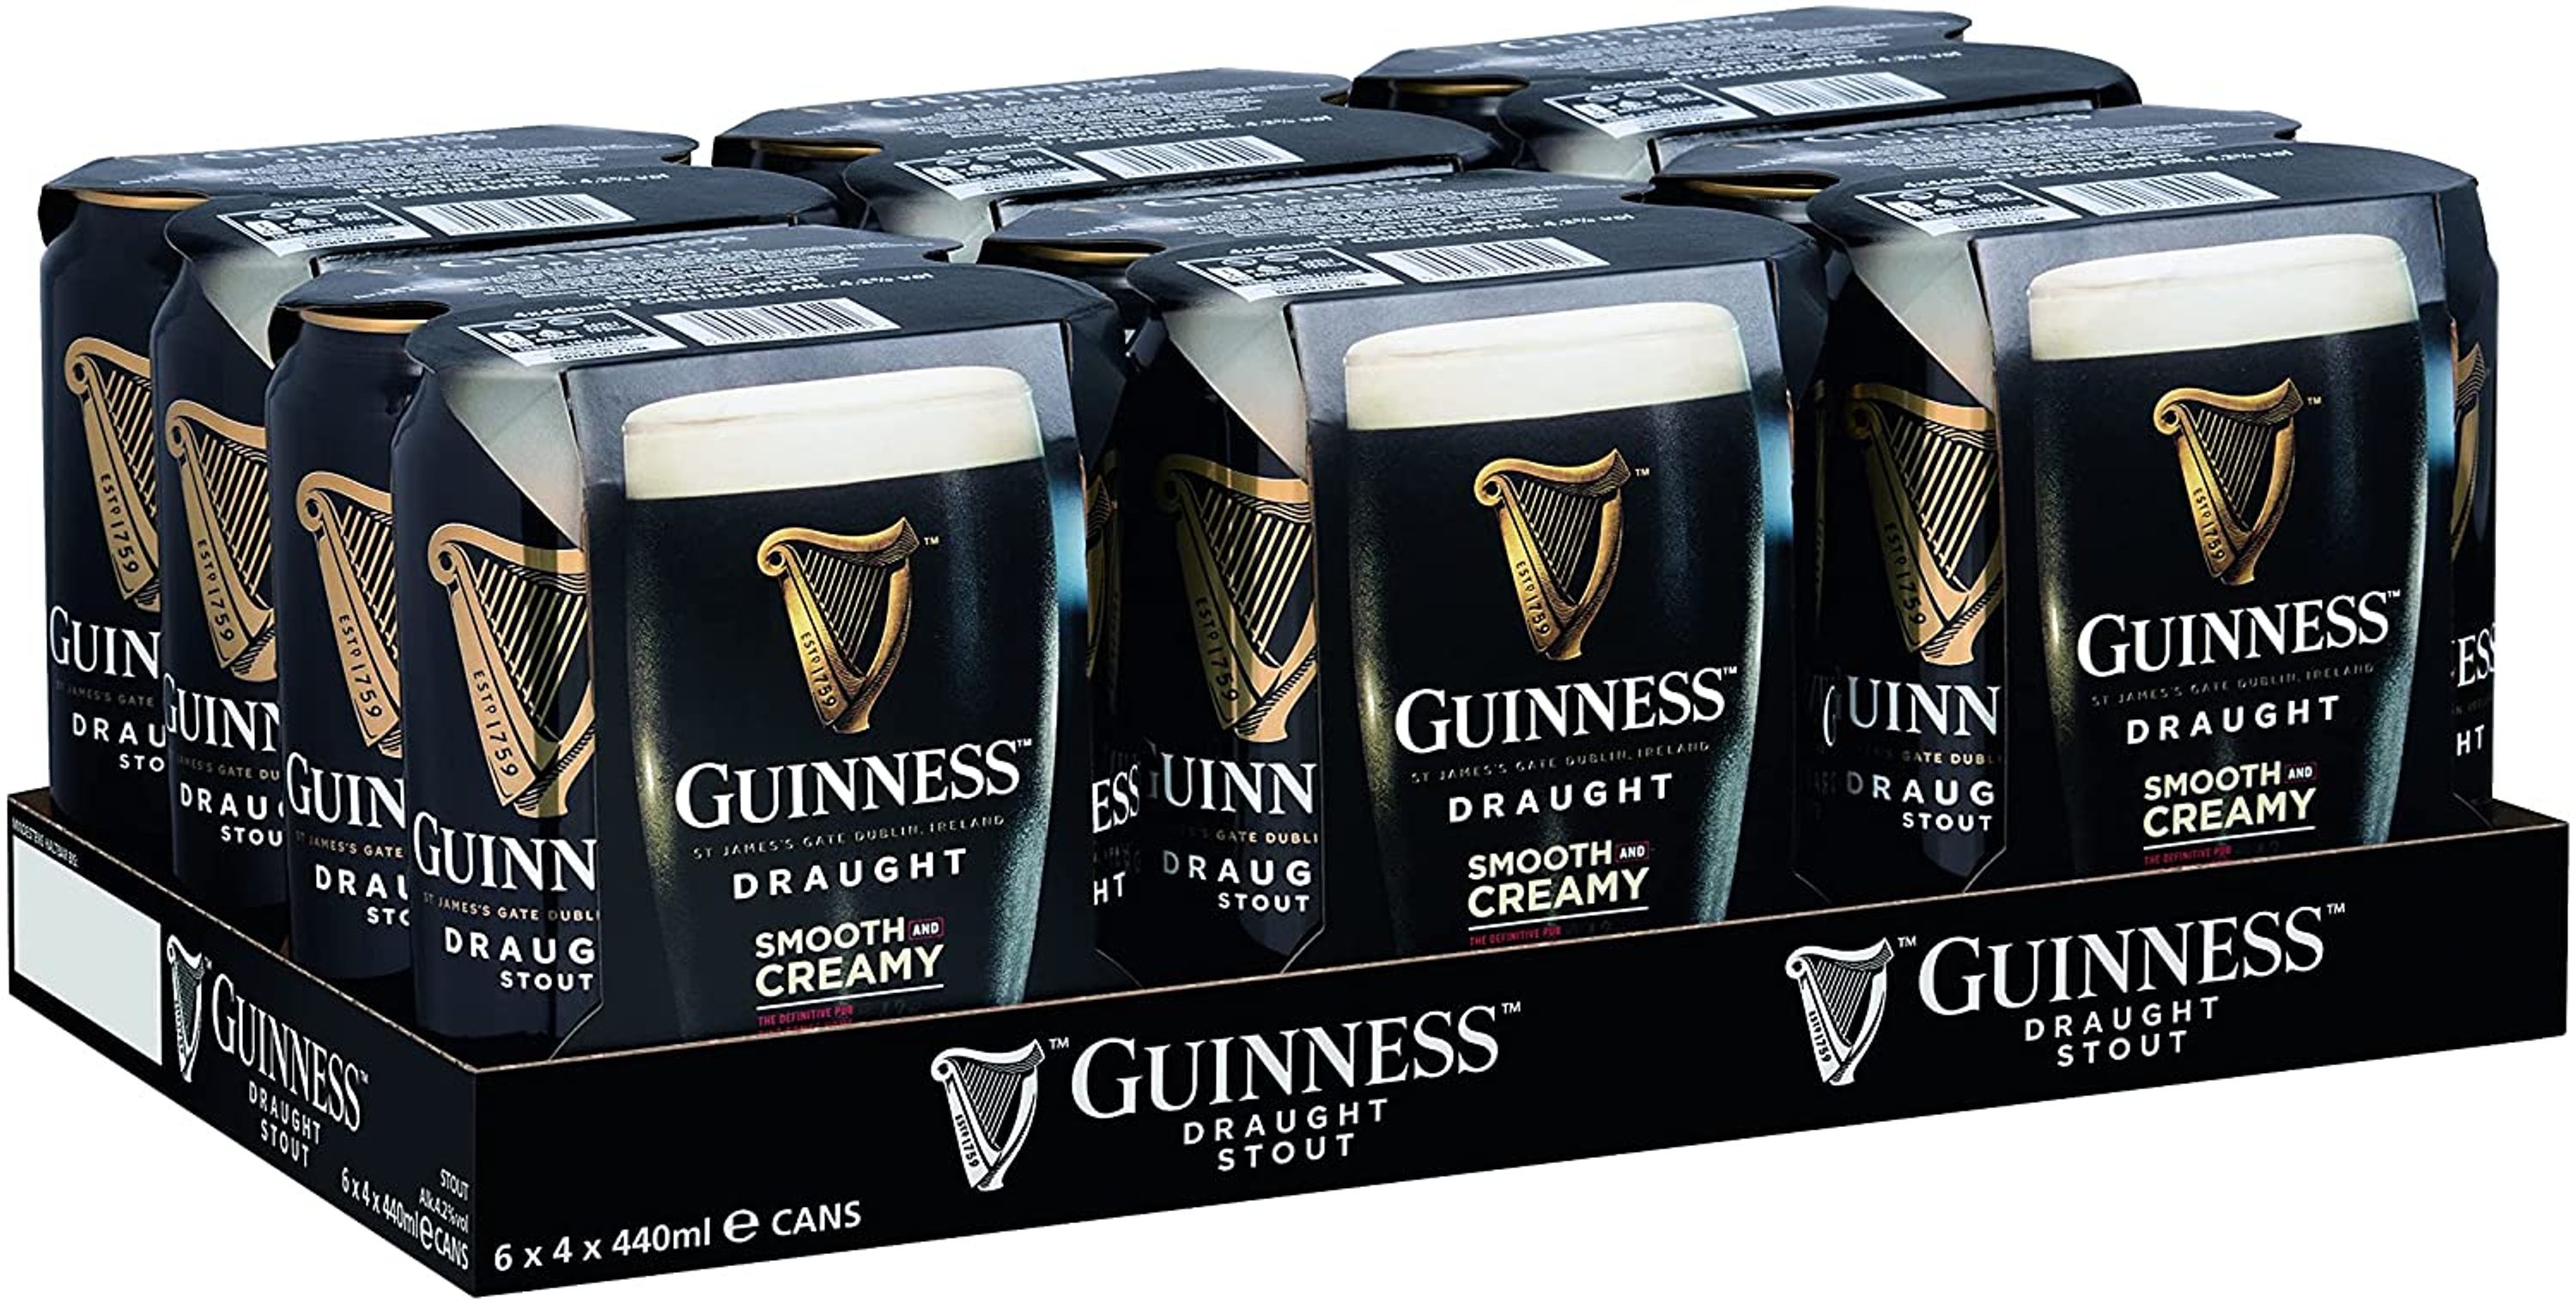 Guinness Draft Stout 24x0.44l, alc. 4.2% by volume, beer from Ireland